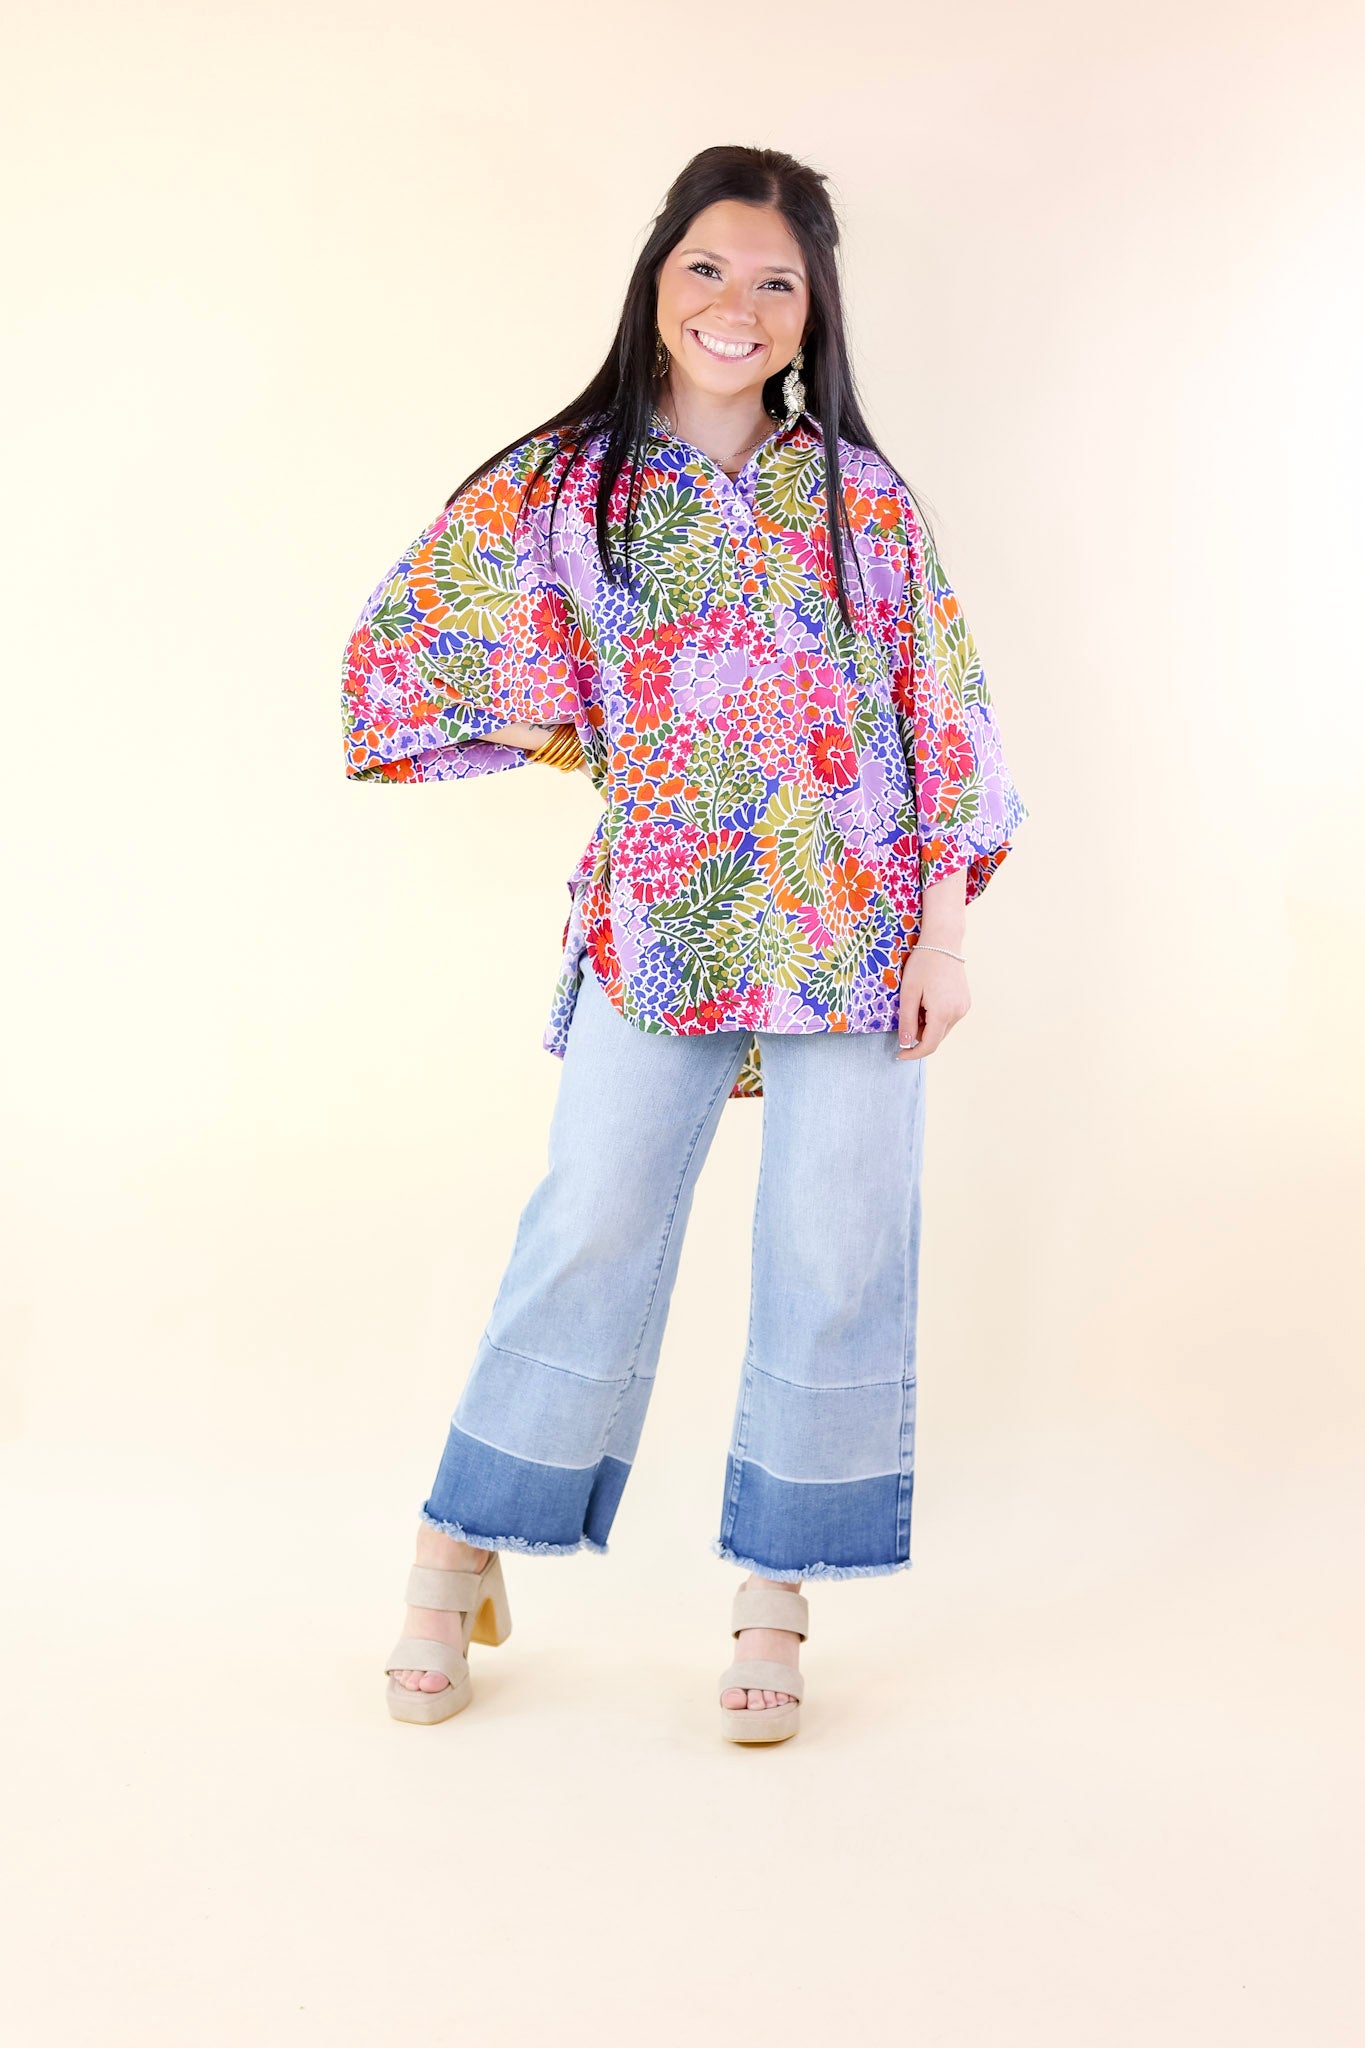 Sweet Surprise Multi-Color Floral Print Half Button Up Poncho Top with Collared Neckline - Giddy Up Glamour Boutique